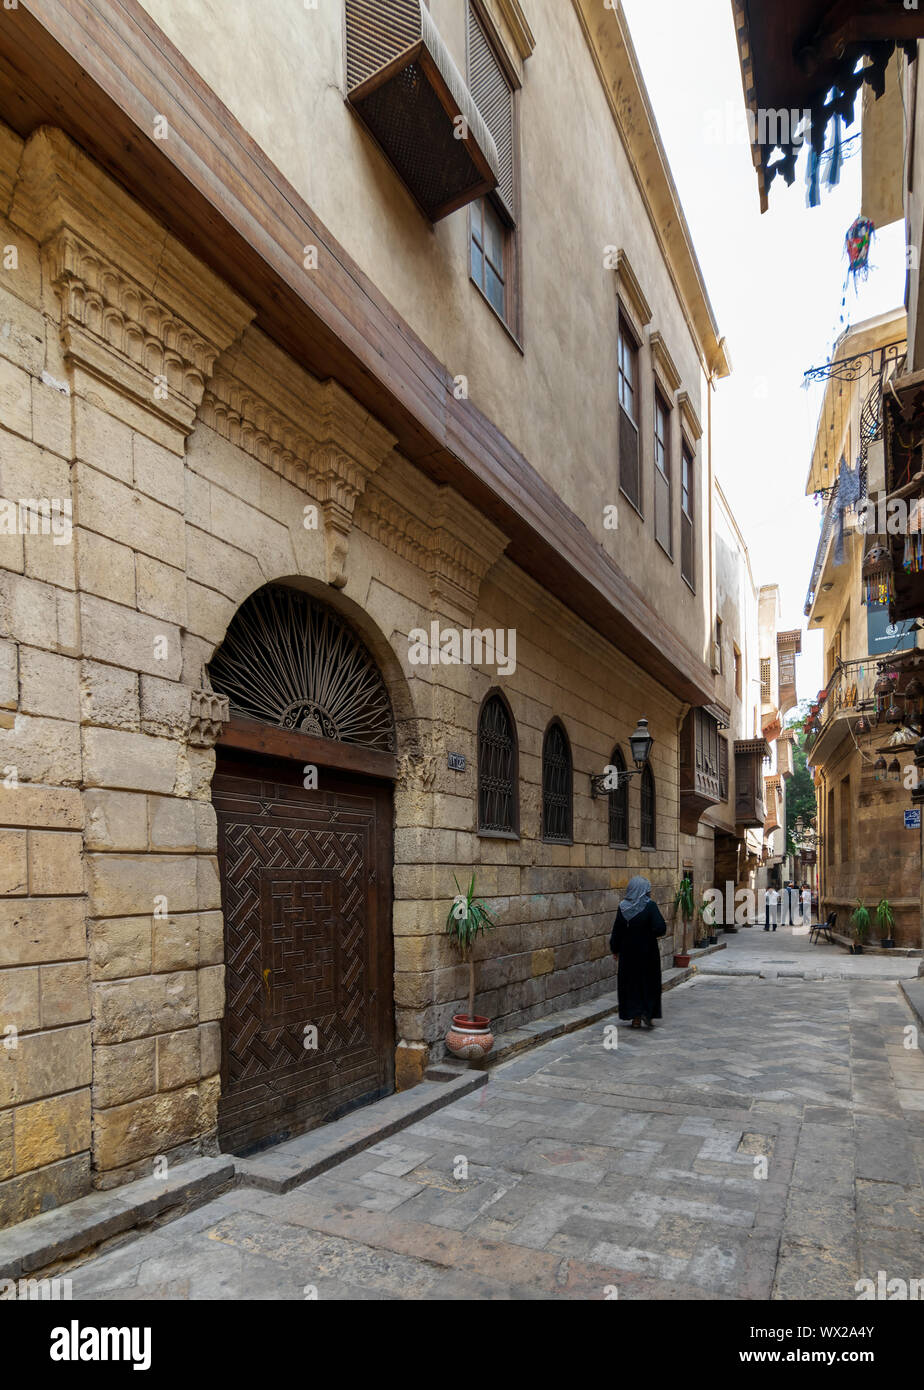 Cairo, Egypt- November 19 2016: Darb Asfour Lane with facade of Bayt Al-Suhaymi old historic house located in Gamalia district, Medieval Cairo Stock Photo